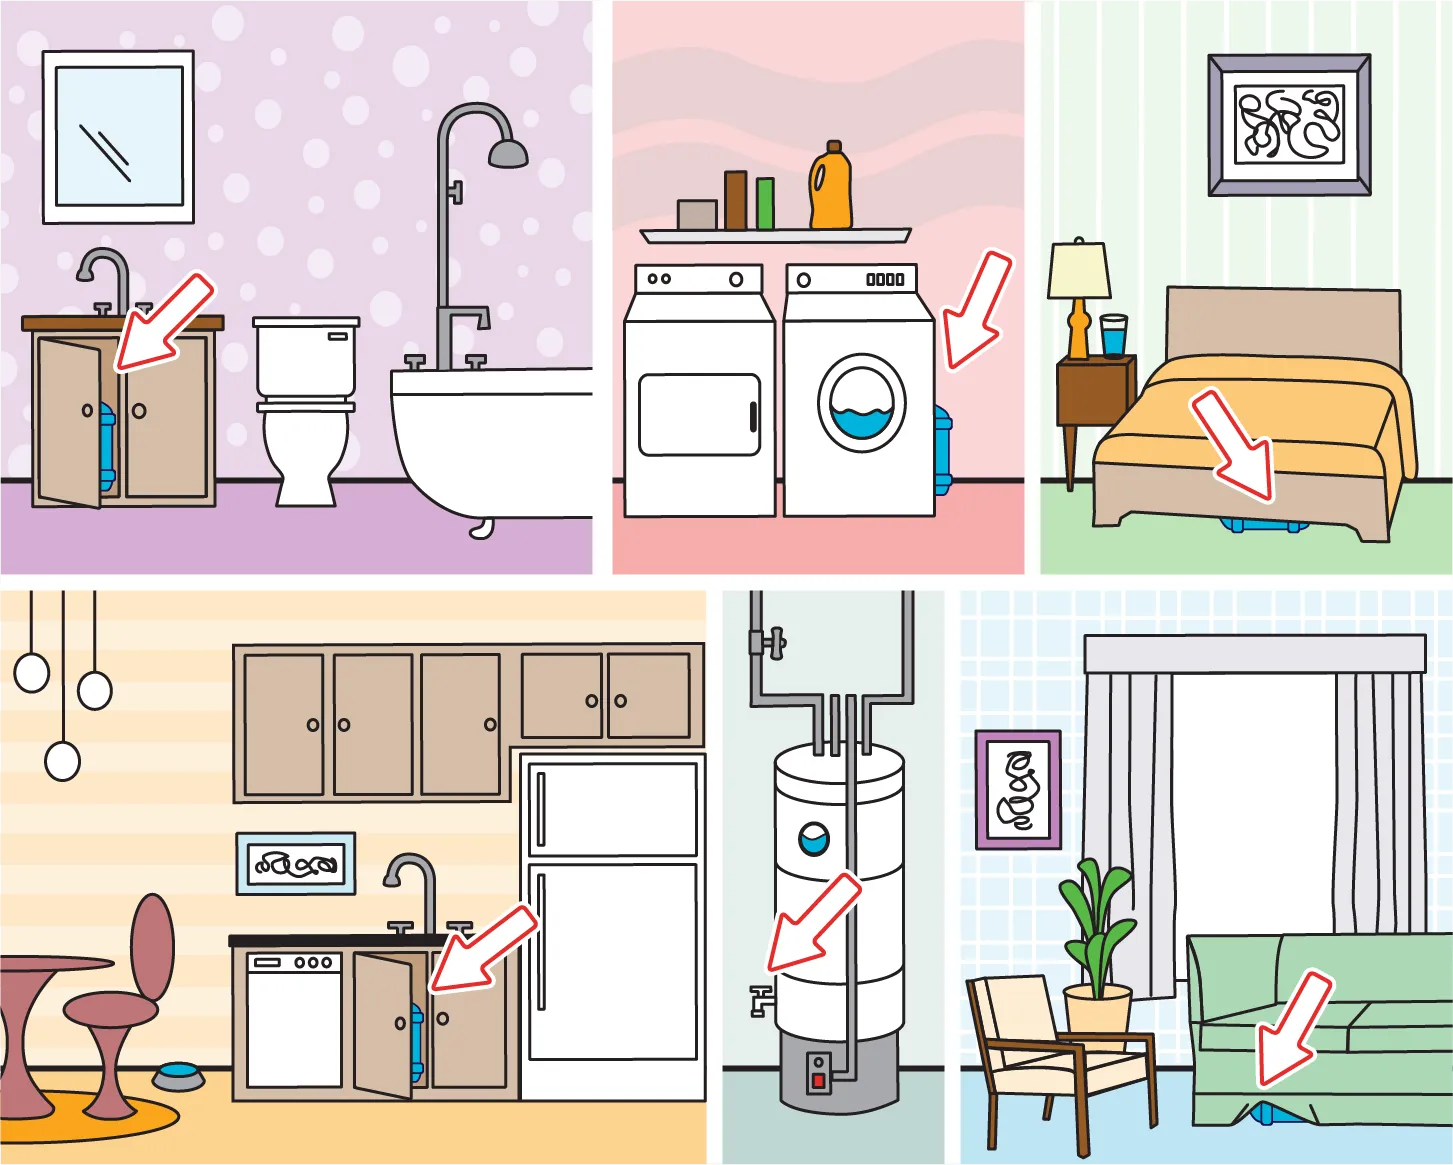 Cutaway of a home with arrows pointing to where emergency water can be stored and accessed: under furniture, behind appliances, in cabinets, and from your water heater